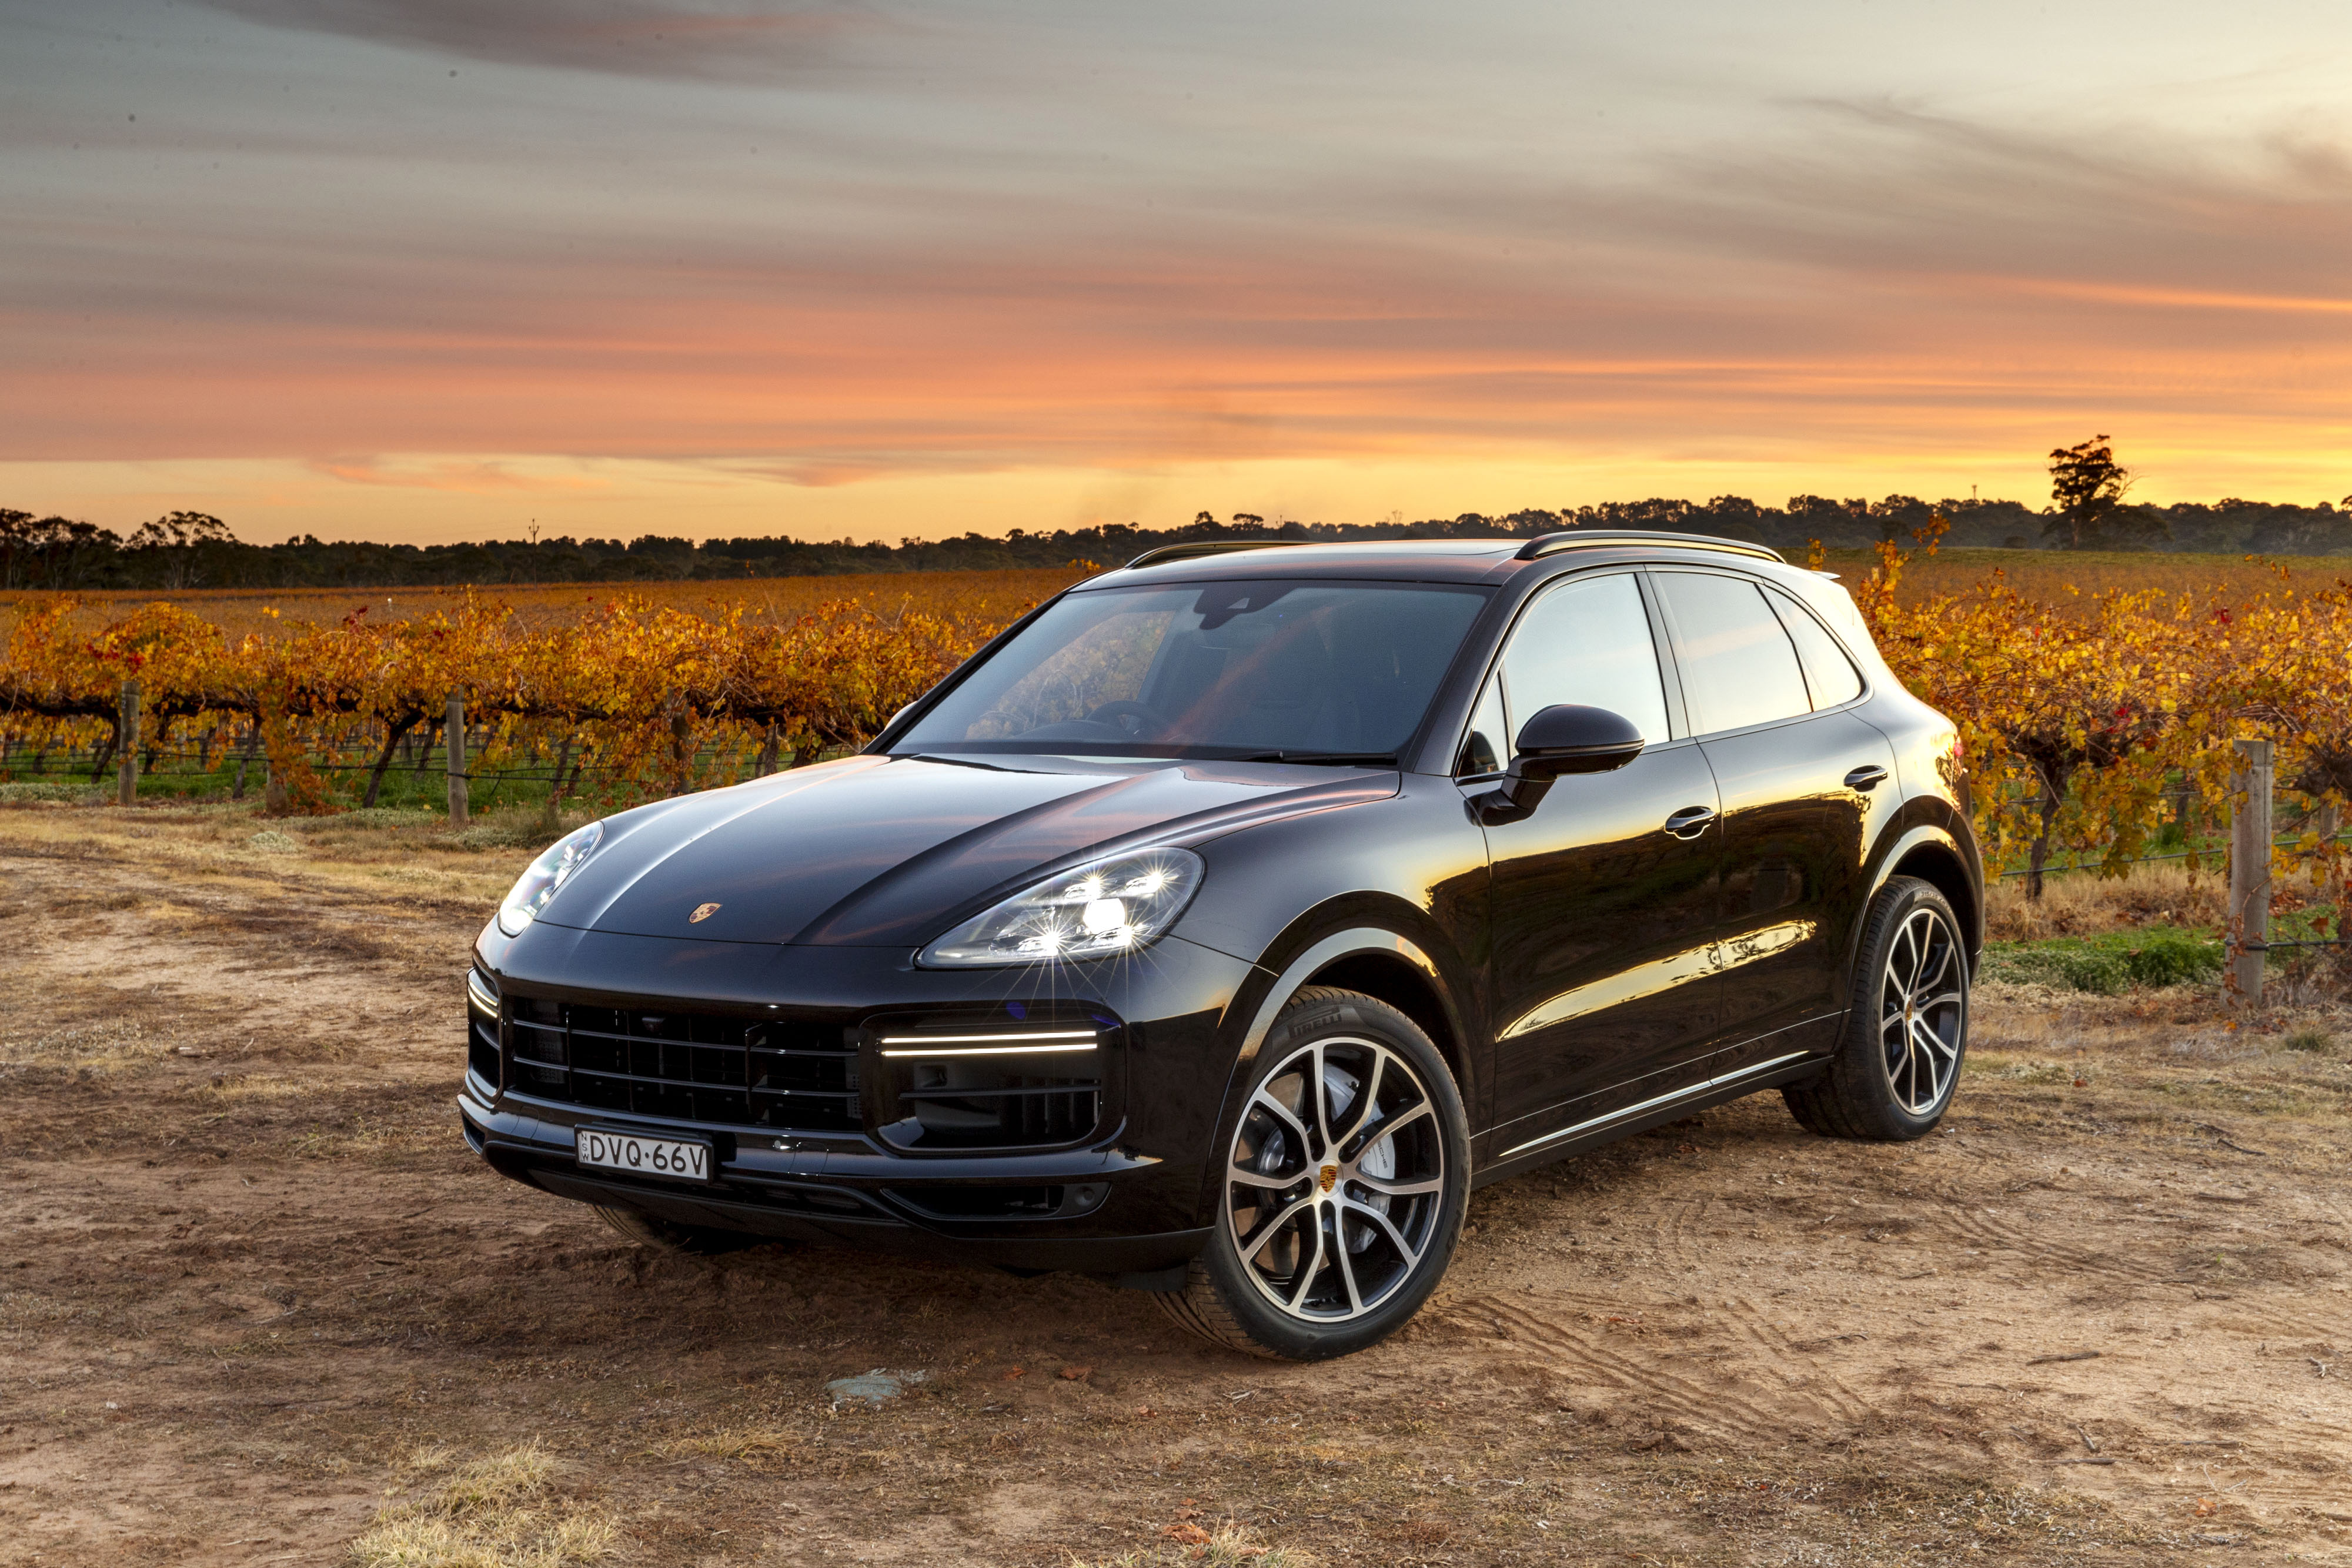 Porsche Cayenne Turbo 2018, HD Cars, 4k Wallpapers, Images